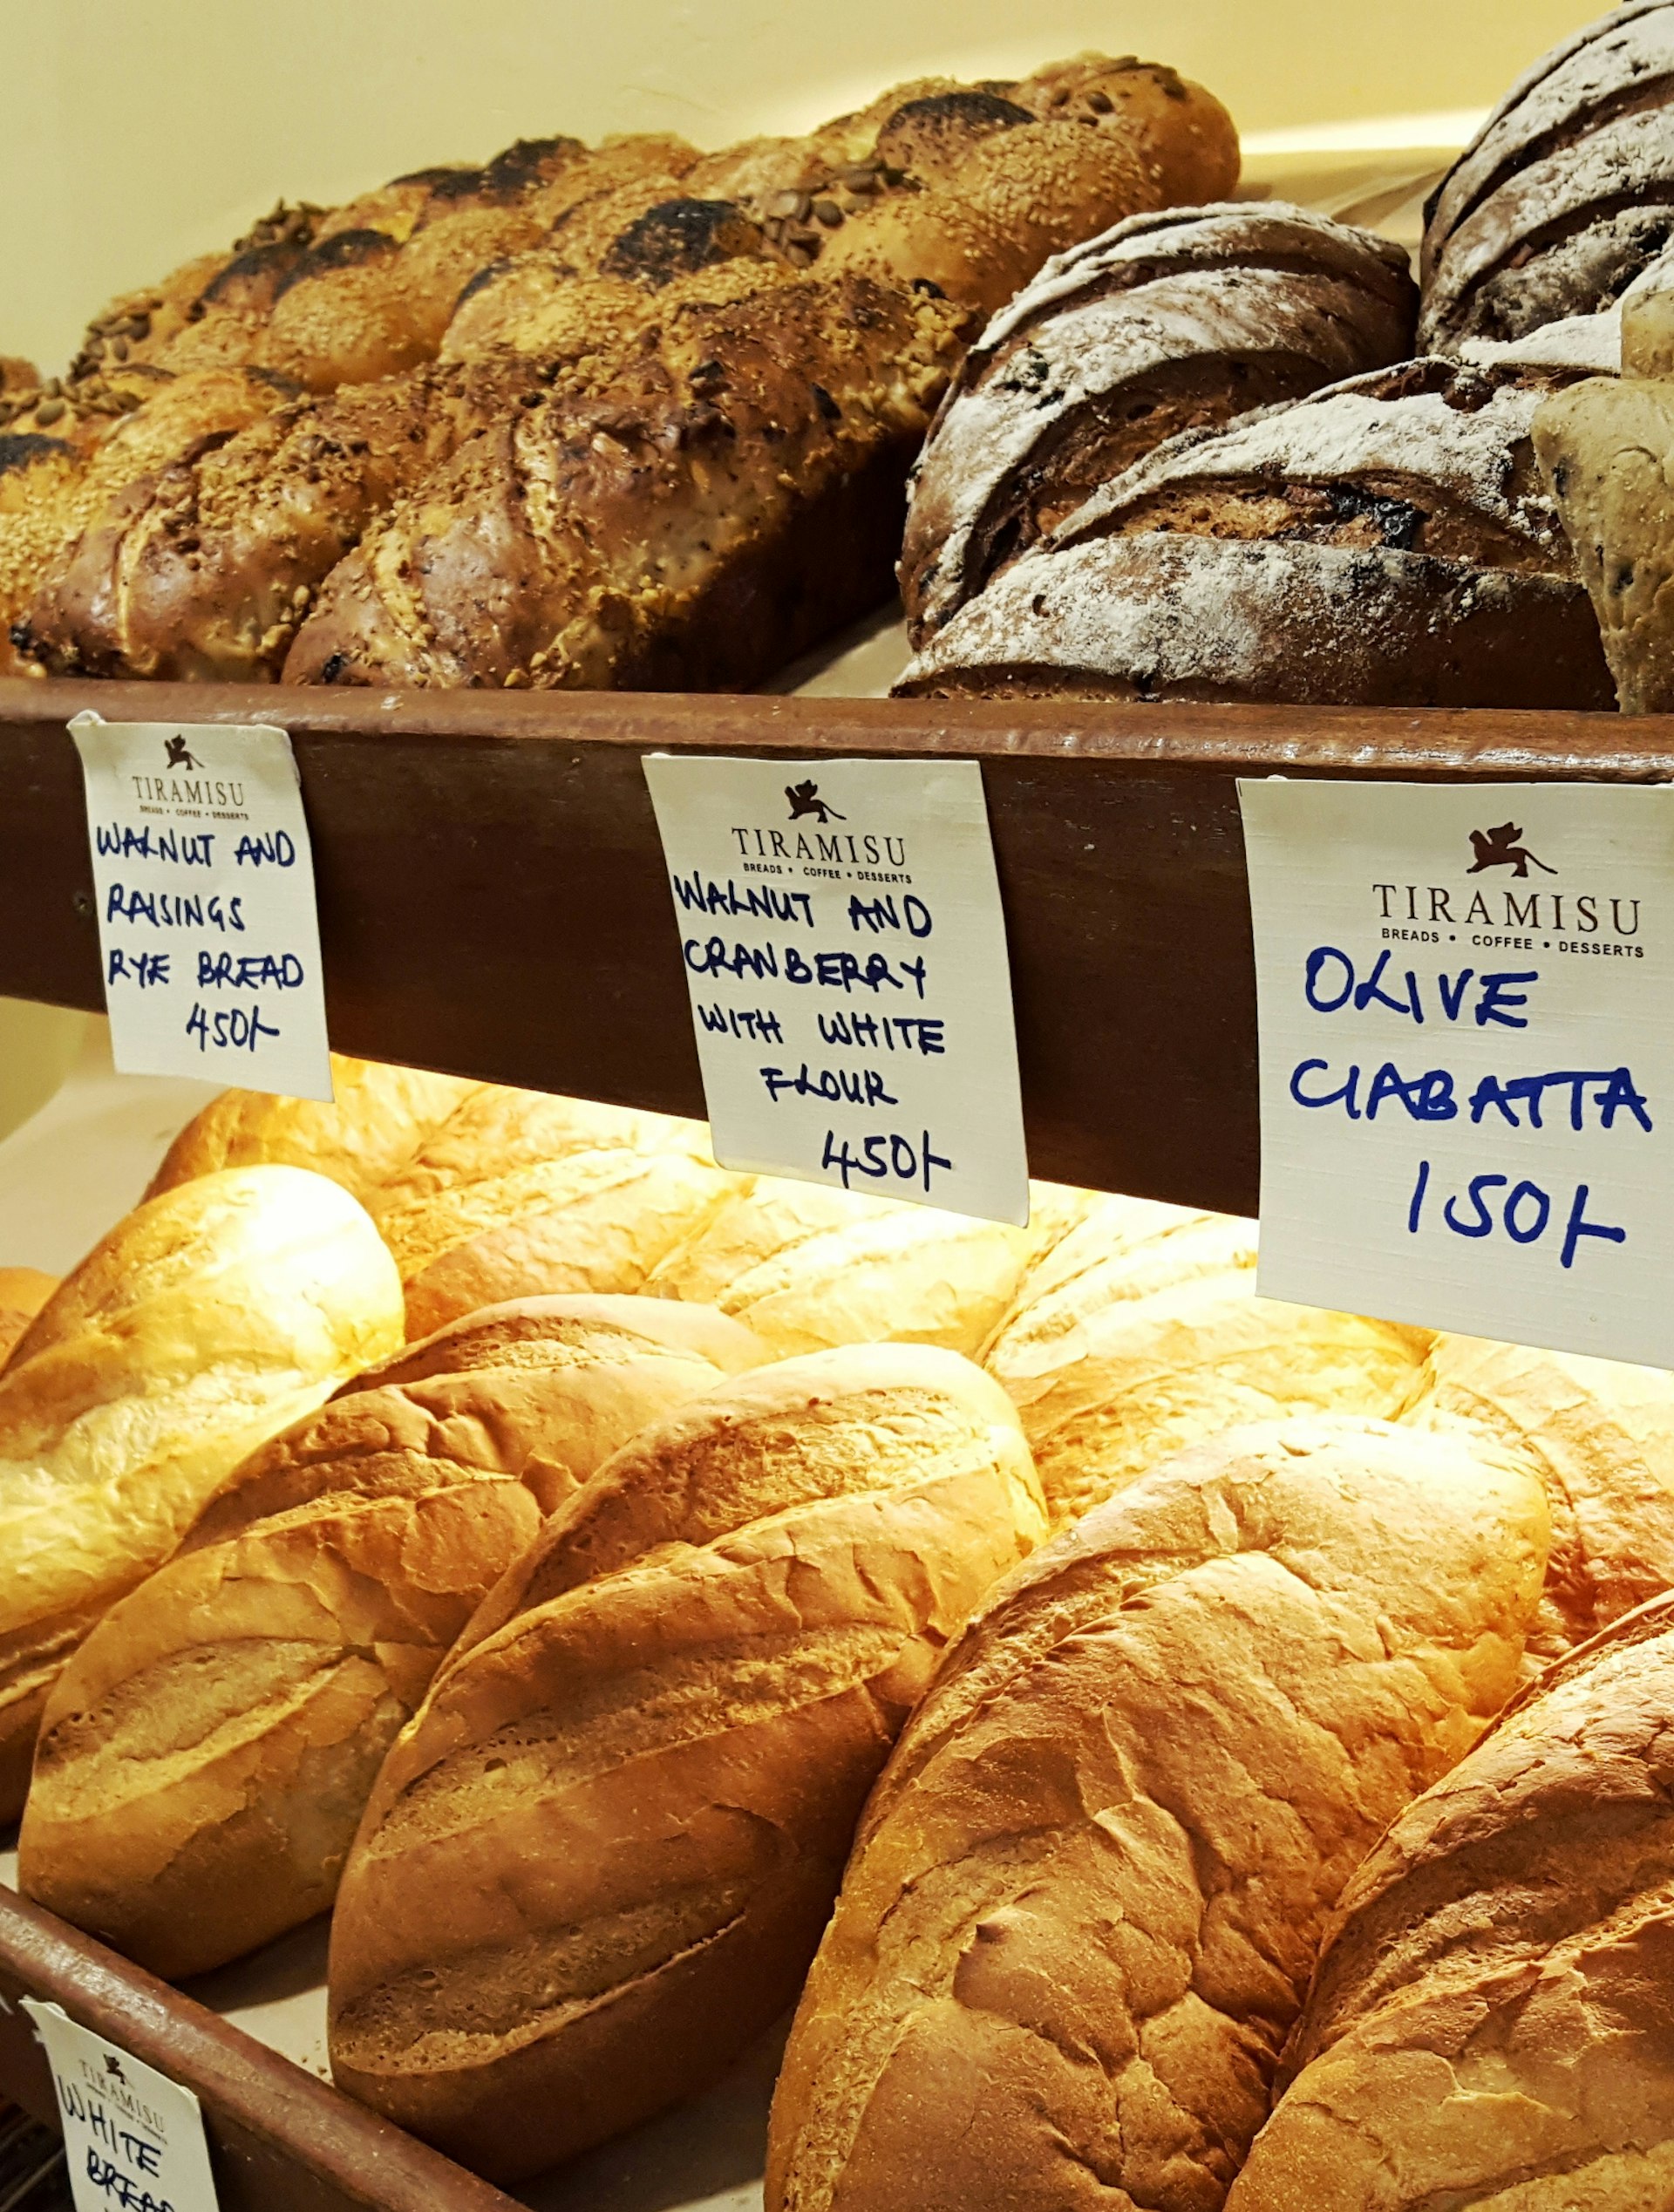 Row upon row of freshly-baked loaves of bread, one dark rye with walnut and raisins, another white bread with walnuts and cranberries, and another olive ciabatta © Clementine Logan / Lonely Planet